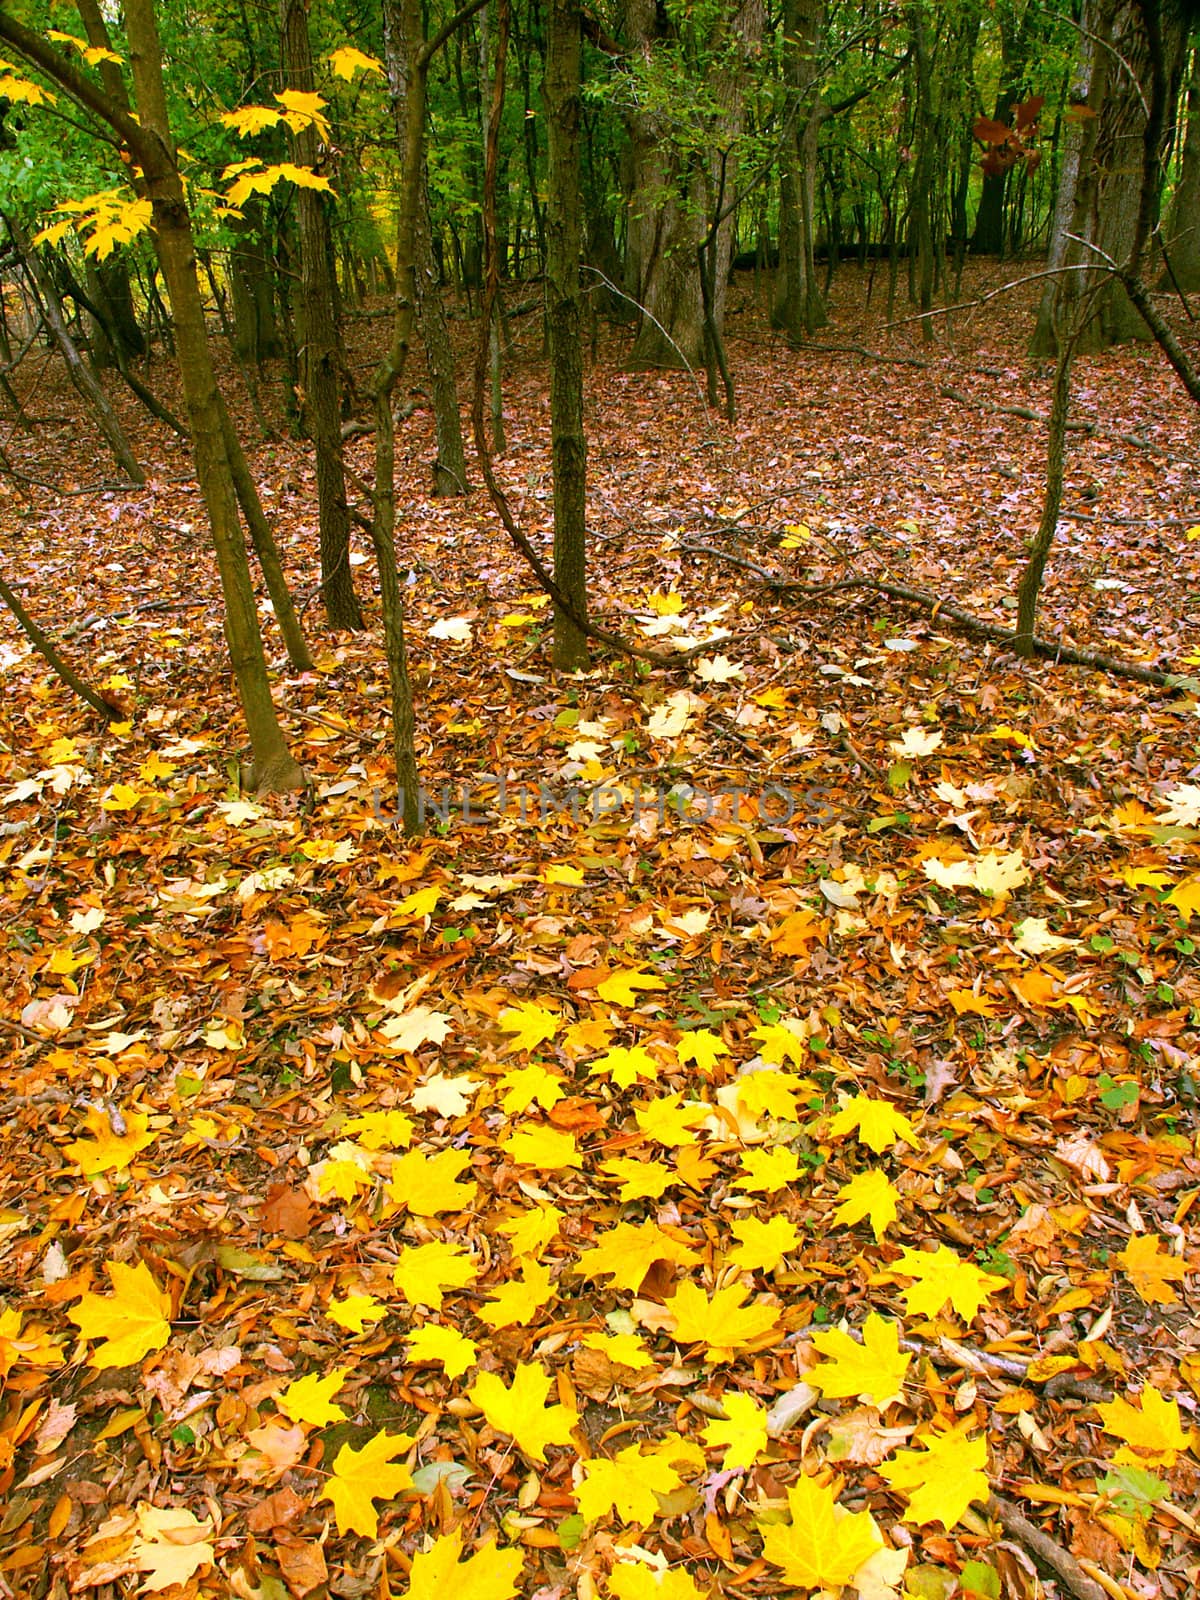 Beautifully colored fall leaves cover a woodland at Kishwaukee Gorge Forest Preserve in northern Illinois.